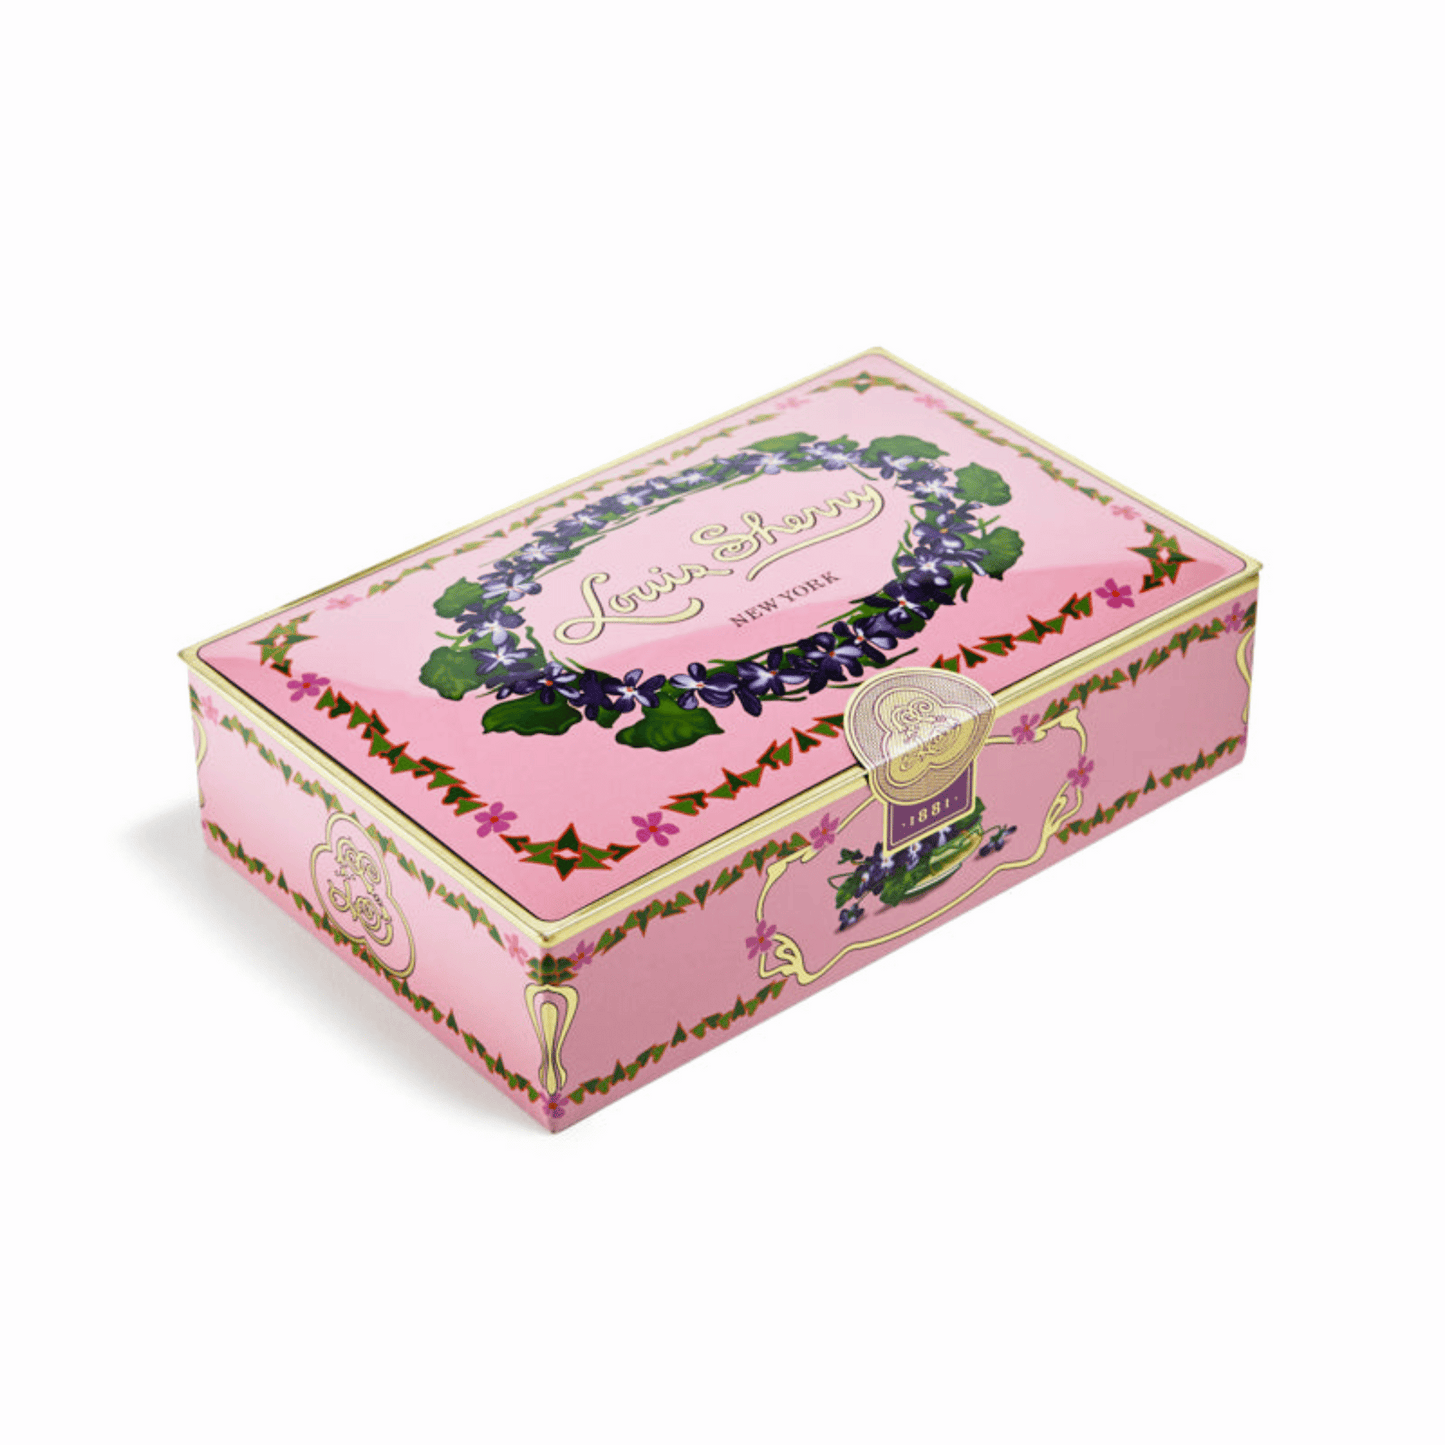 Primary Image of Orchid (Pink) Chocolate Tin